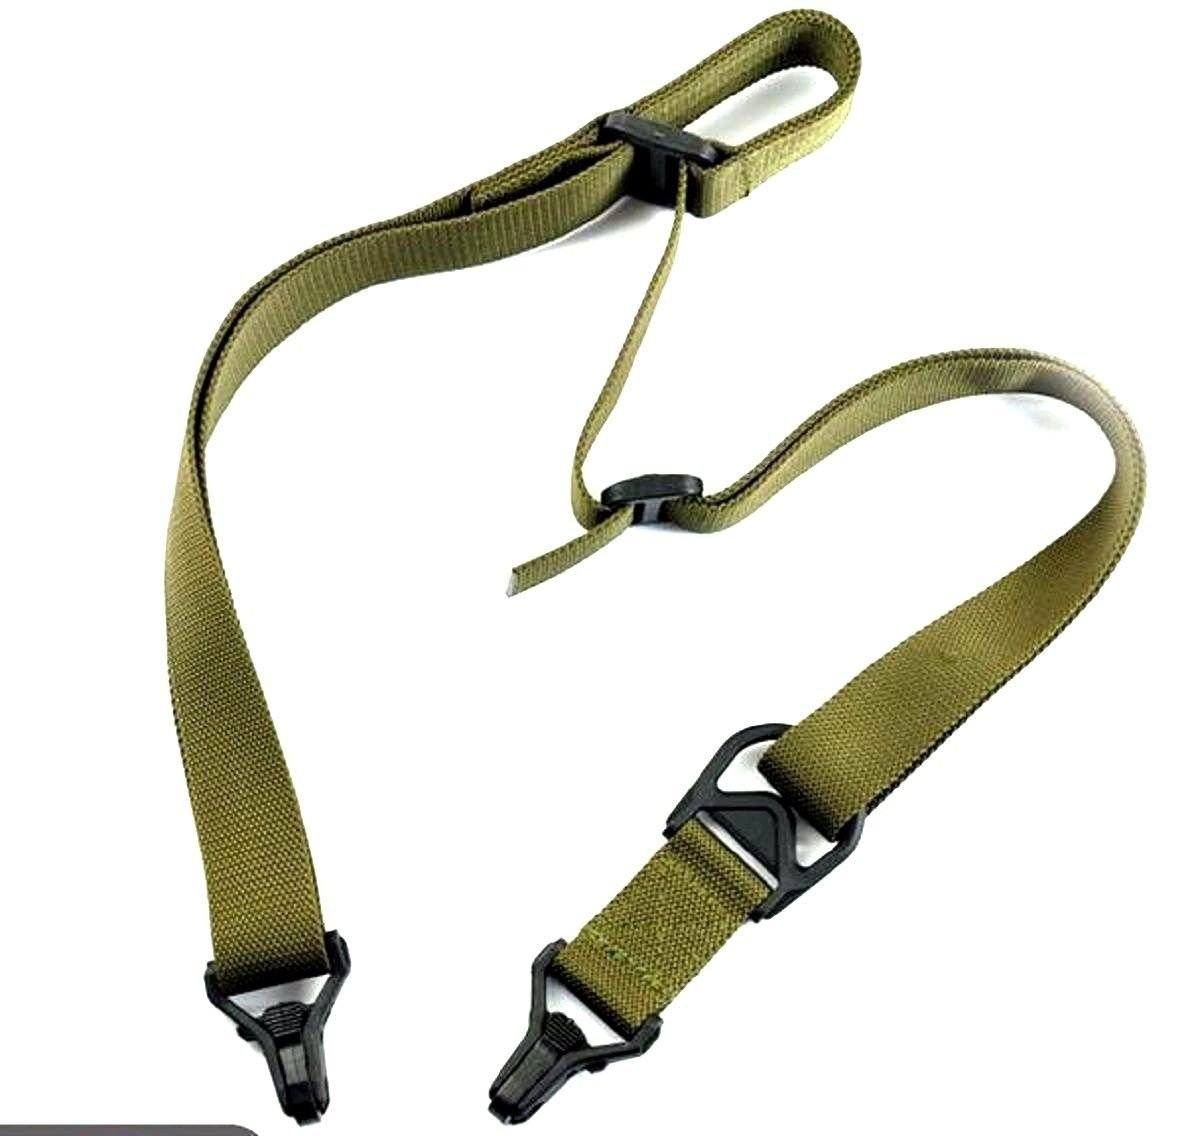 Tactical 1 or 2 point Sling, Quick Action Adjustment Slings & Swivels Green Blob Outdoors Green 